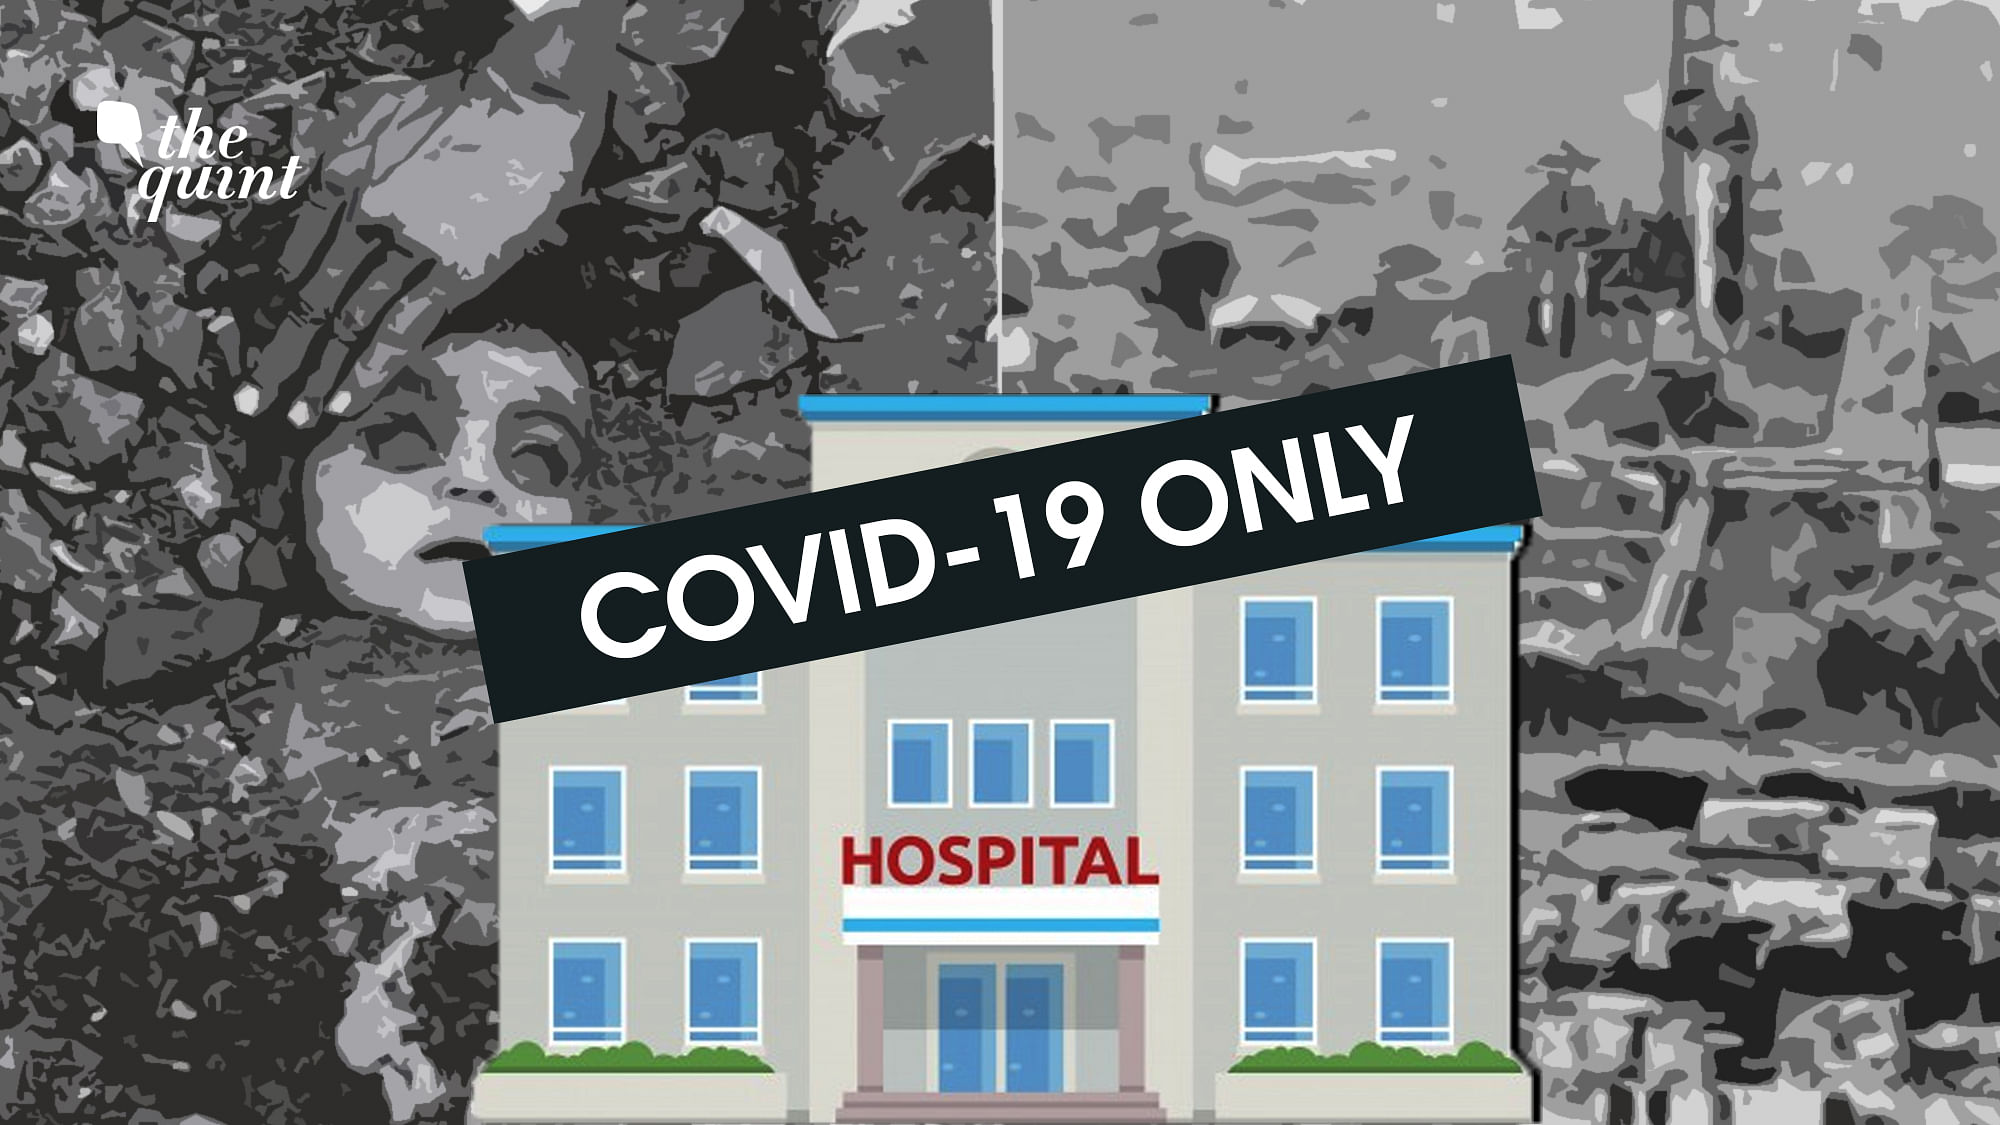 The Bhopal Memorial Hospital and Research Centre, which was set up to care for victims of the tragedy, has been reserved for COVID-19 treatment and isolation.